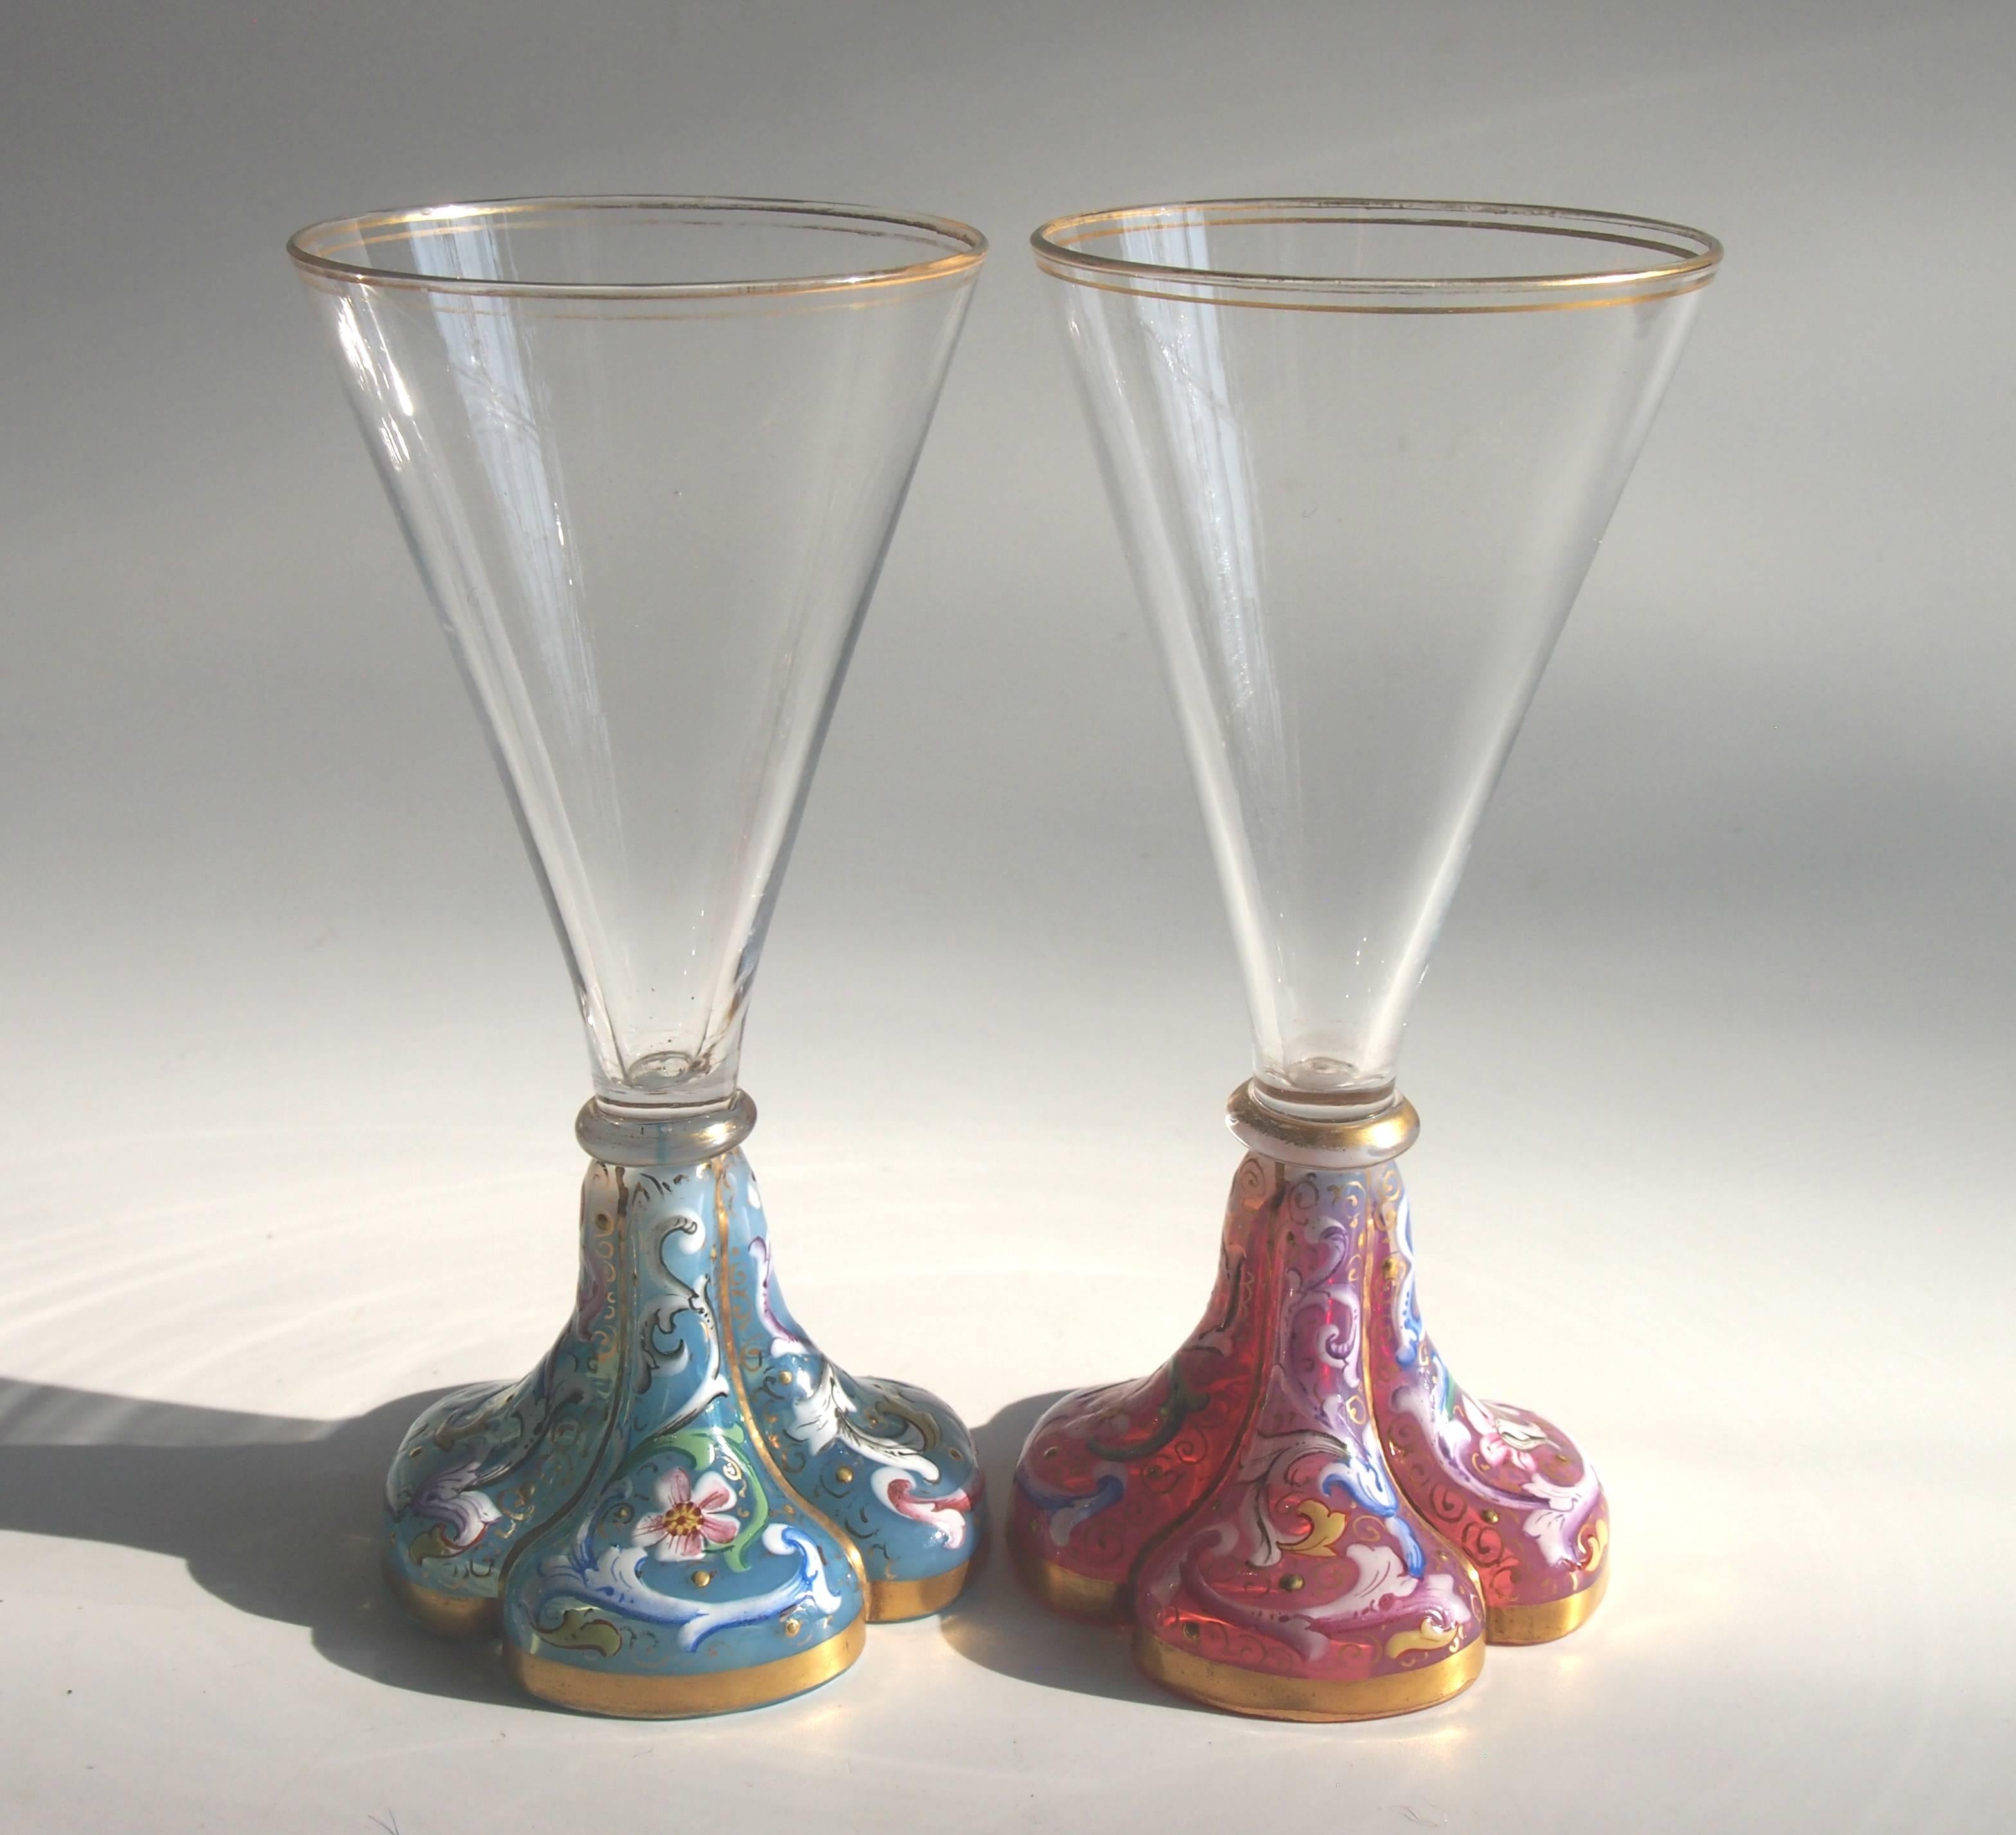 Rare pair of Moser, early Art Nouveau, pink and blue opal enamel footed Liquor glasses. One glass has a pink opal foot the other baby blue opal, each is finely enamelled with flowers and acanthus leaves.

Moser was, and still is, one of the